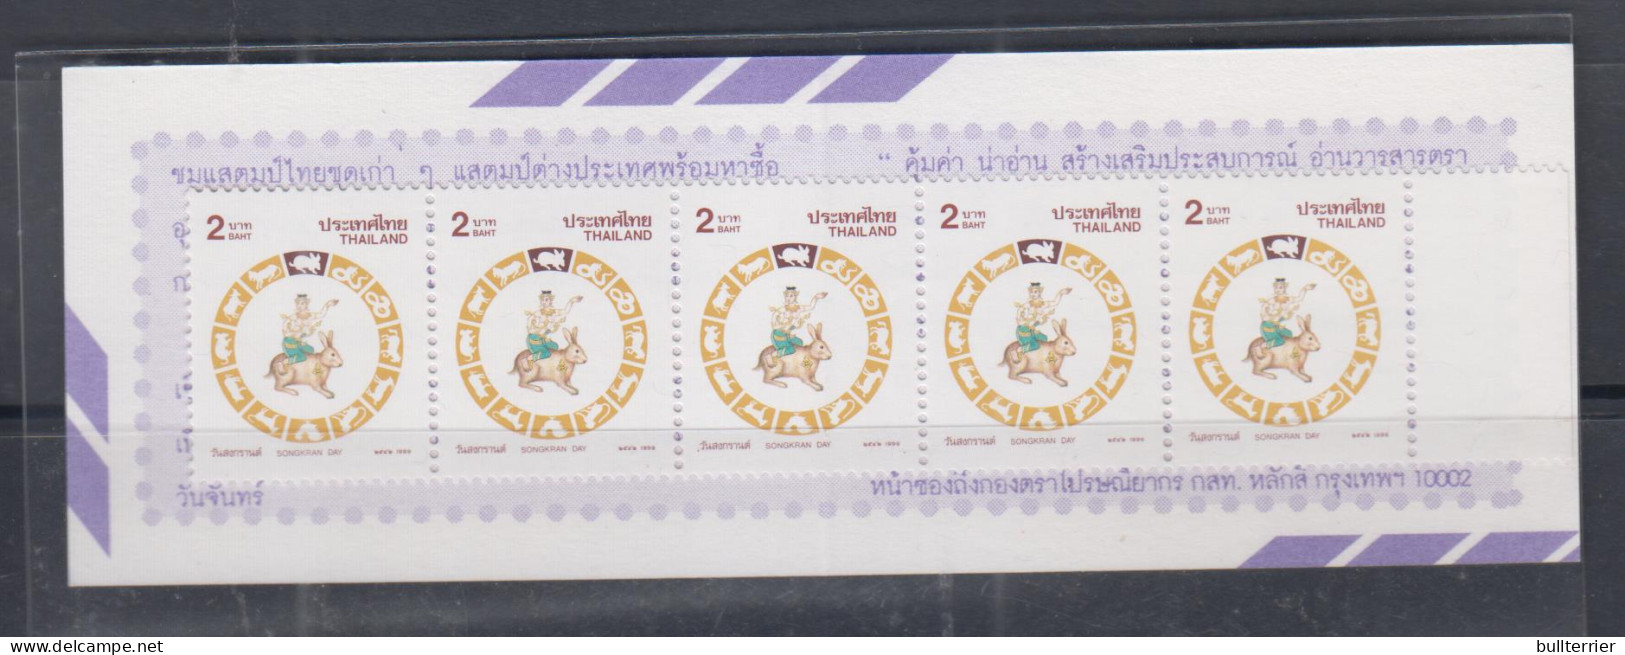 THAILAND - 1999 -  SONGKRAN DAY /   RABBIT   BOOKLET  MINT NEVER HINGED  - Thailand